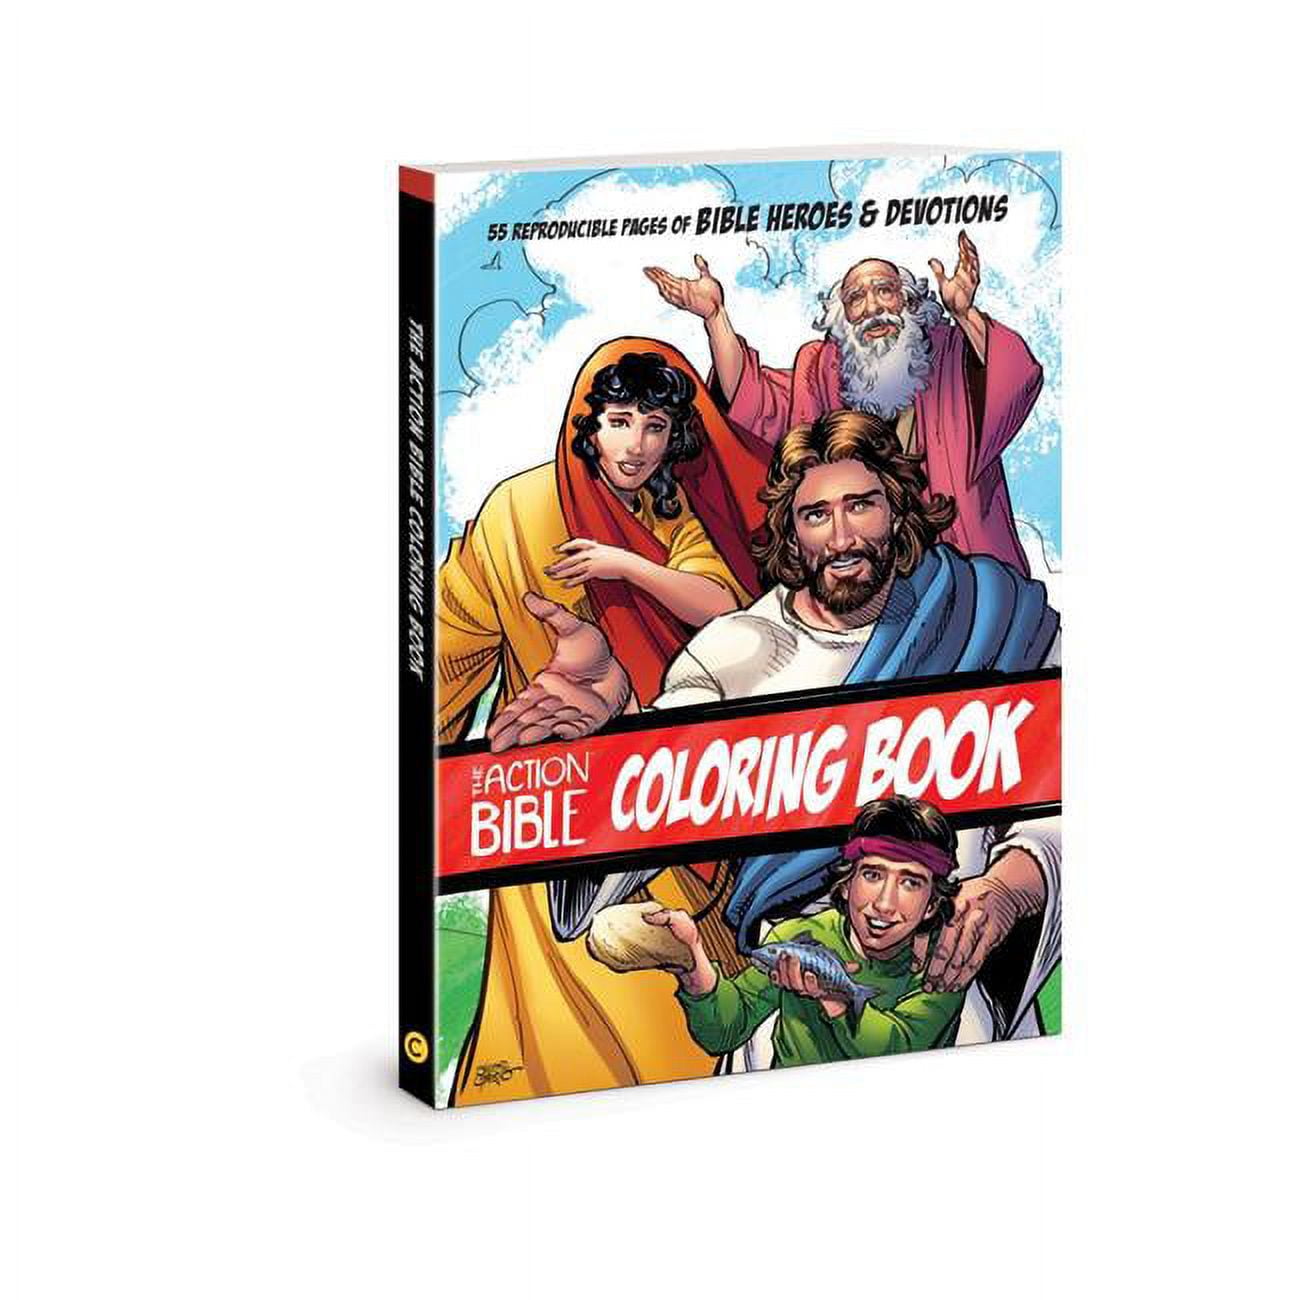 135354 The Action Bible Coloring Book